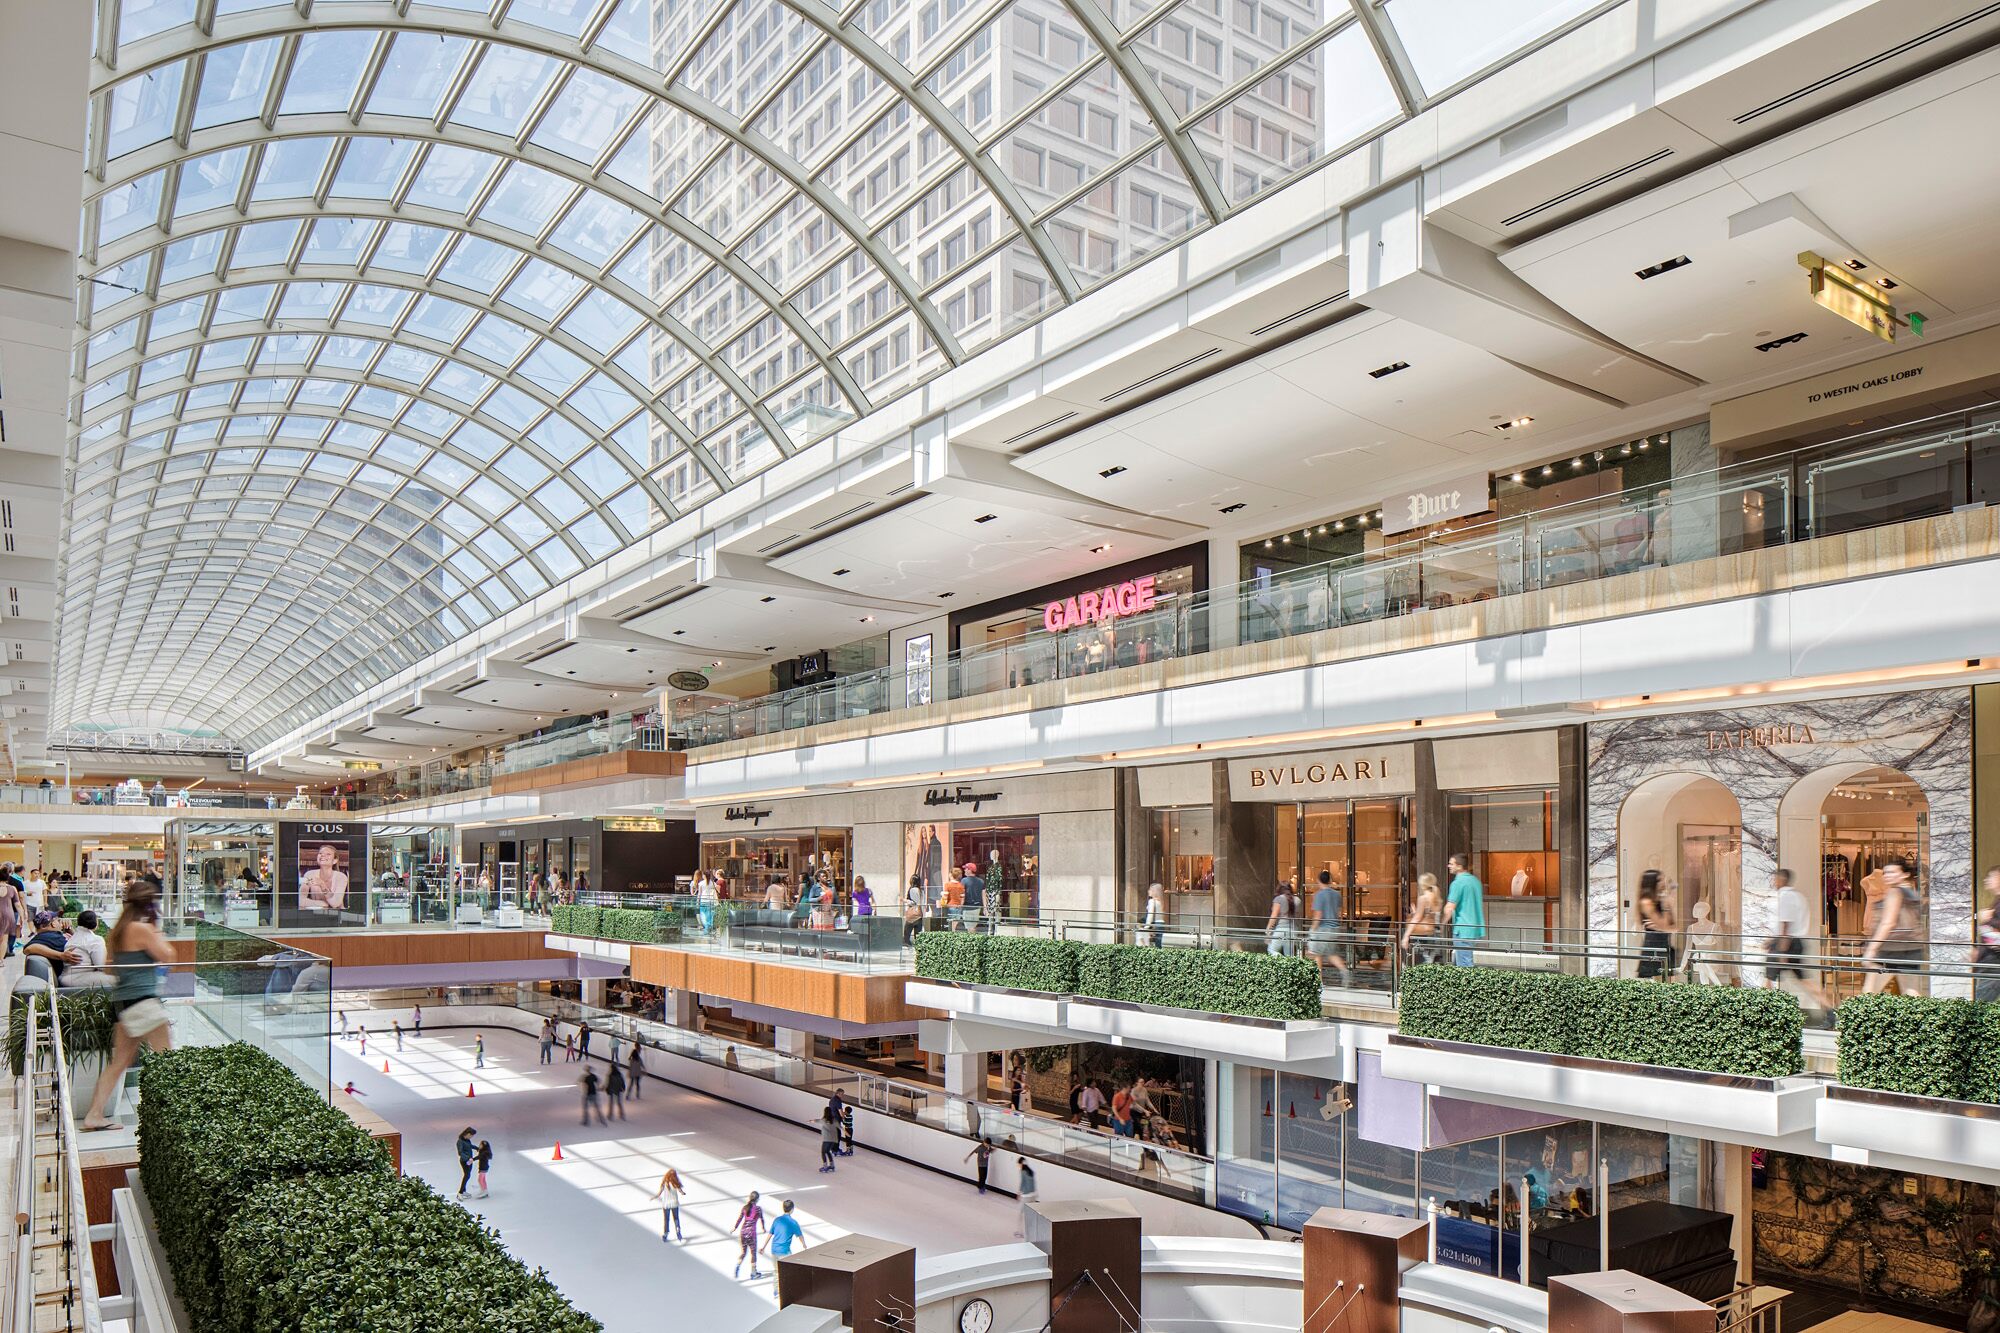 Copley Place Mall: Is This High-End Luxury Mall on the Decline? Boston,  Massachusetts. 